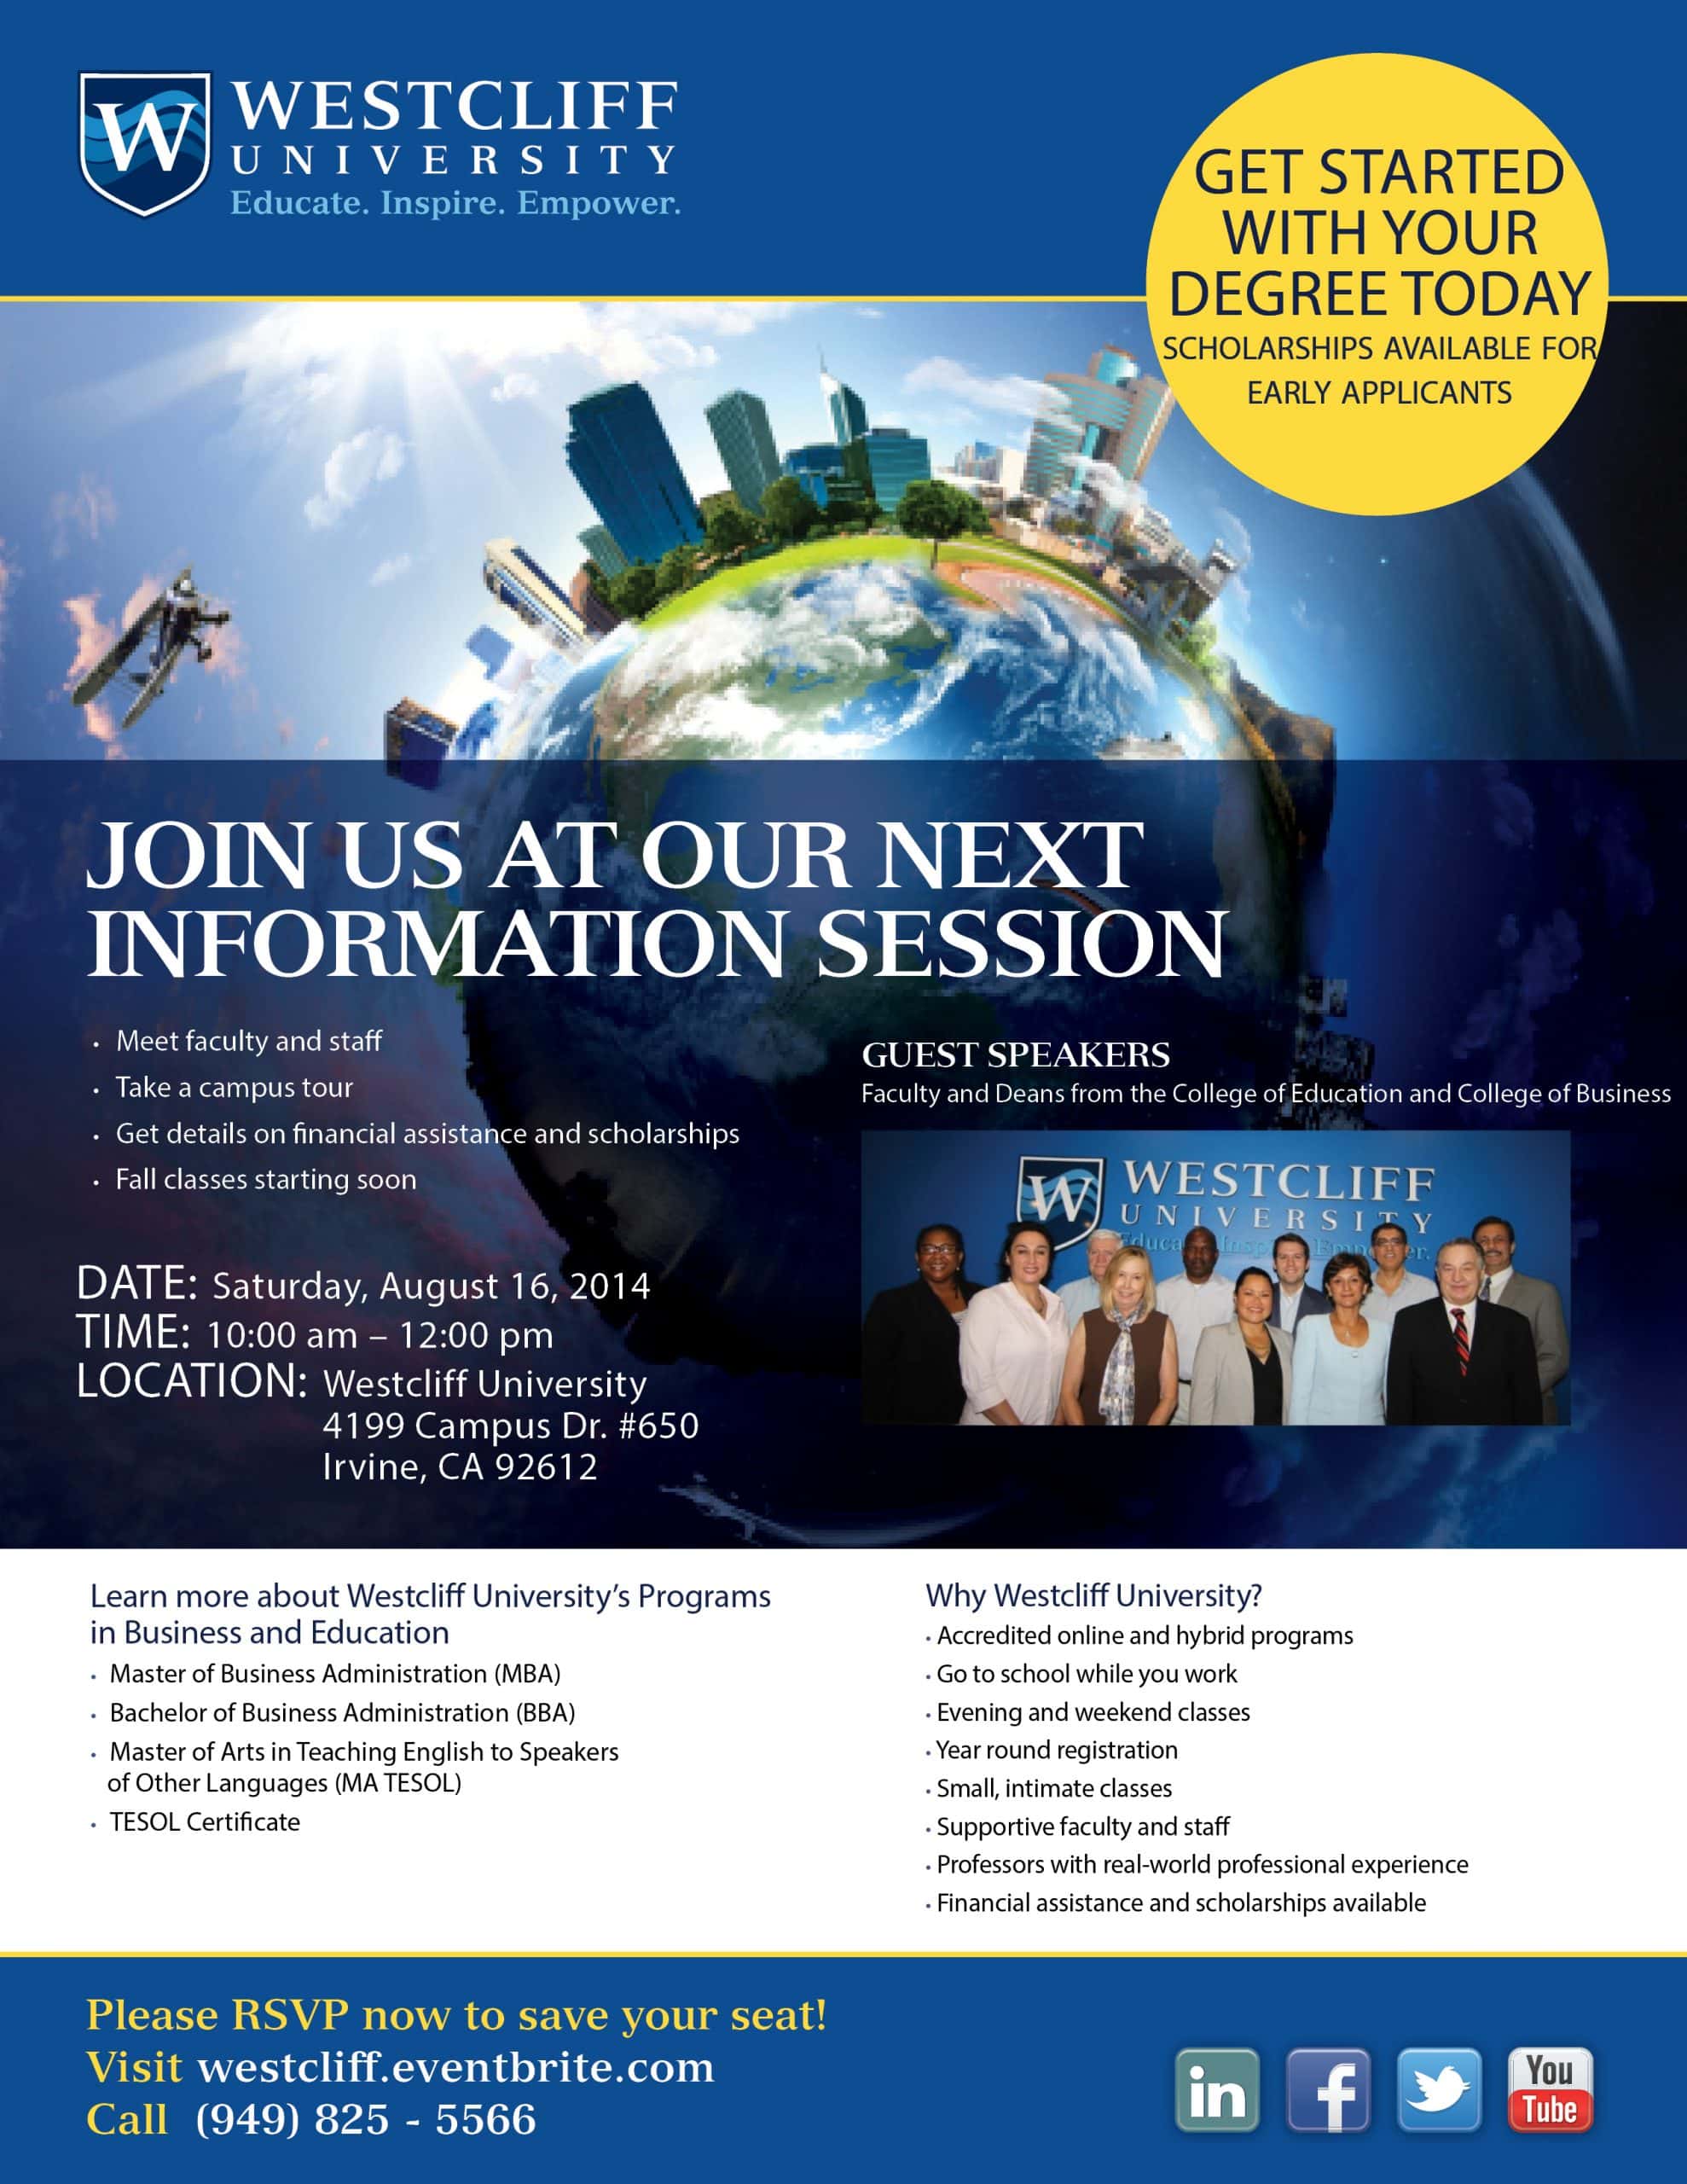 Fall 2014 Information Session on Saturday, 8/16/14 10AM-12PM